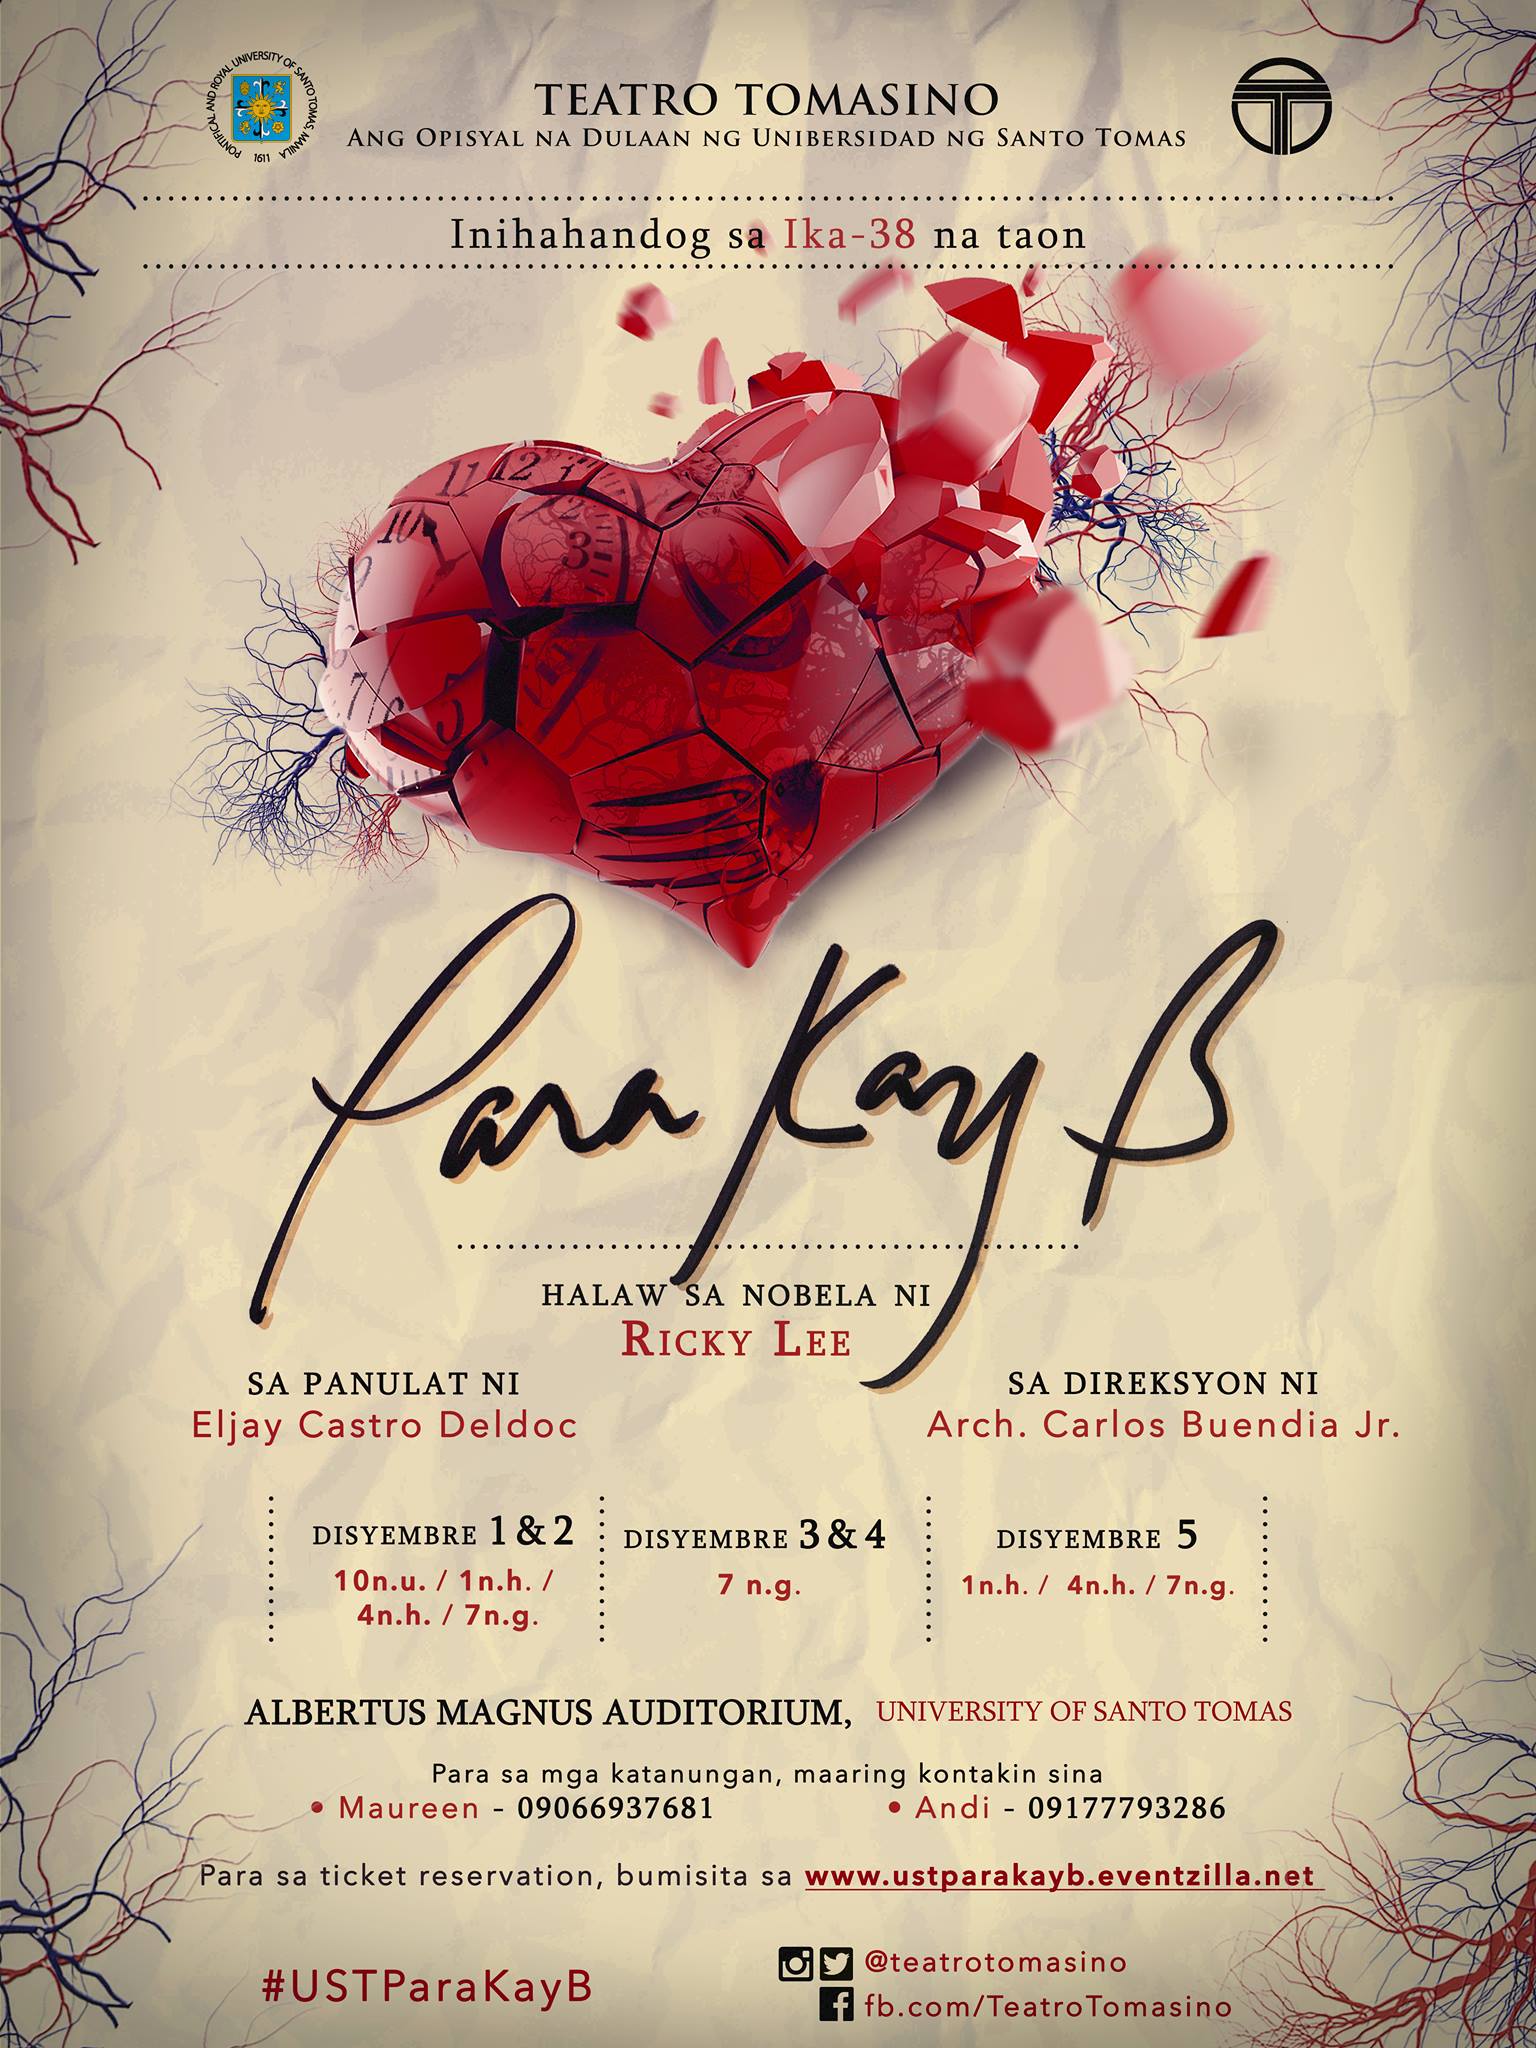 Para Kay B Tuesday, December 1 at 10:00am Show Map UST Albertus Magnus Auditorium Albetus Magnus Building, 1008 Manila, Philippines Find Tickets Tickets Available ustparakayb.eventzilla.net “Para Kay B” is a stage adaptation by Eljay Deldoc Castro of the Ricky Lee novel of the same title and directed by Arch. Carlos A. Buendia, Jr. The play explores the romantically and painfully elusive concept of love extending beyond the facets of the human mind’s understanding of it. Here, love is shown transcending the passage of time, gender and sexuality, blood relations, and even worlds. With the aim of tugging at one’s heartstrings, the play presents five different stories centering on this elusiveness of love, and how each character struggles against it, with it and to accept it. Showtimes: December 1 - 10am, 1pm, 4pm, 7pm December 2 - 10am, 1pm, 4pm, 7pm December 3 - 7pm December 4 - 7pm December 5 - 1pm, 4pm, 7pm Ticket Prices: Early Bird - Php 130 (Until November 10 only) Starting November 11: Regular Rate - Php 200 Thomasian Student - Php 150 (must present a valid UST student ID) Non-Thomasian Student - Php 170 (must present a valid student ID)